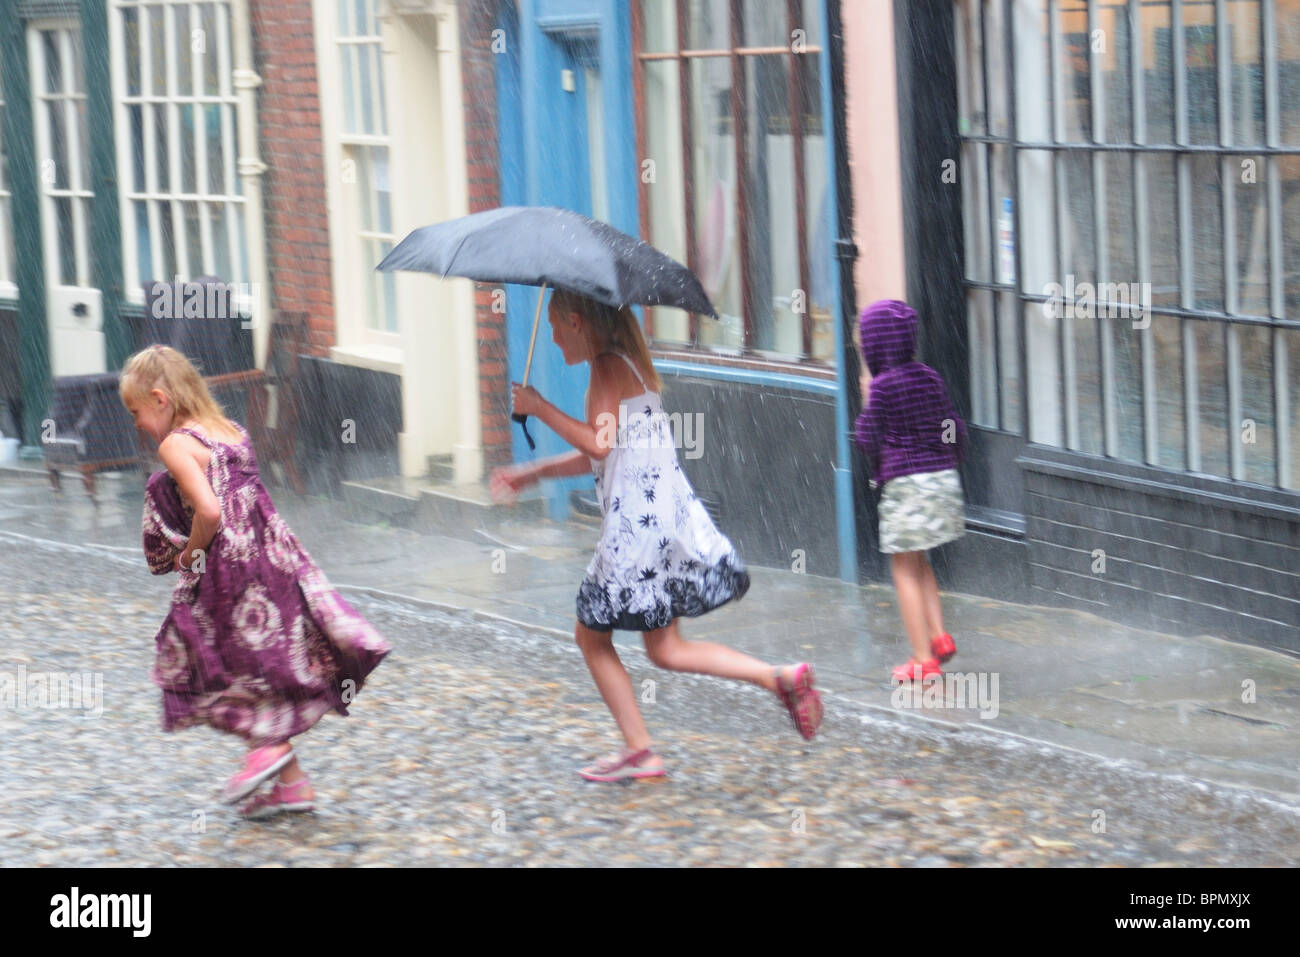 Three young girls running in the summer rain in cobbled street. Stock Photo